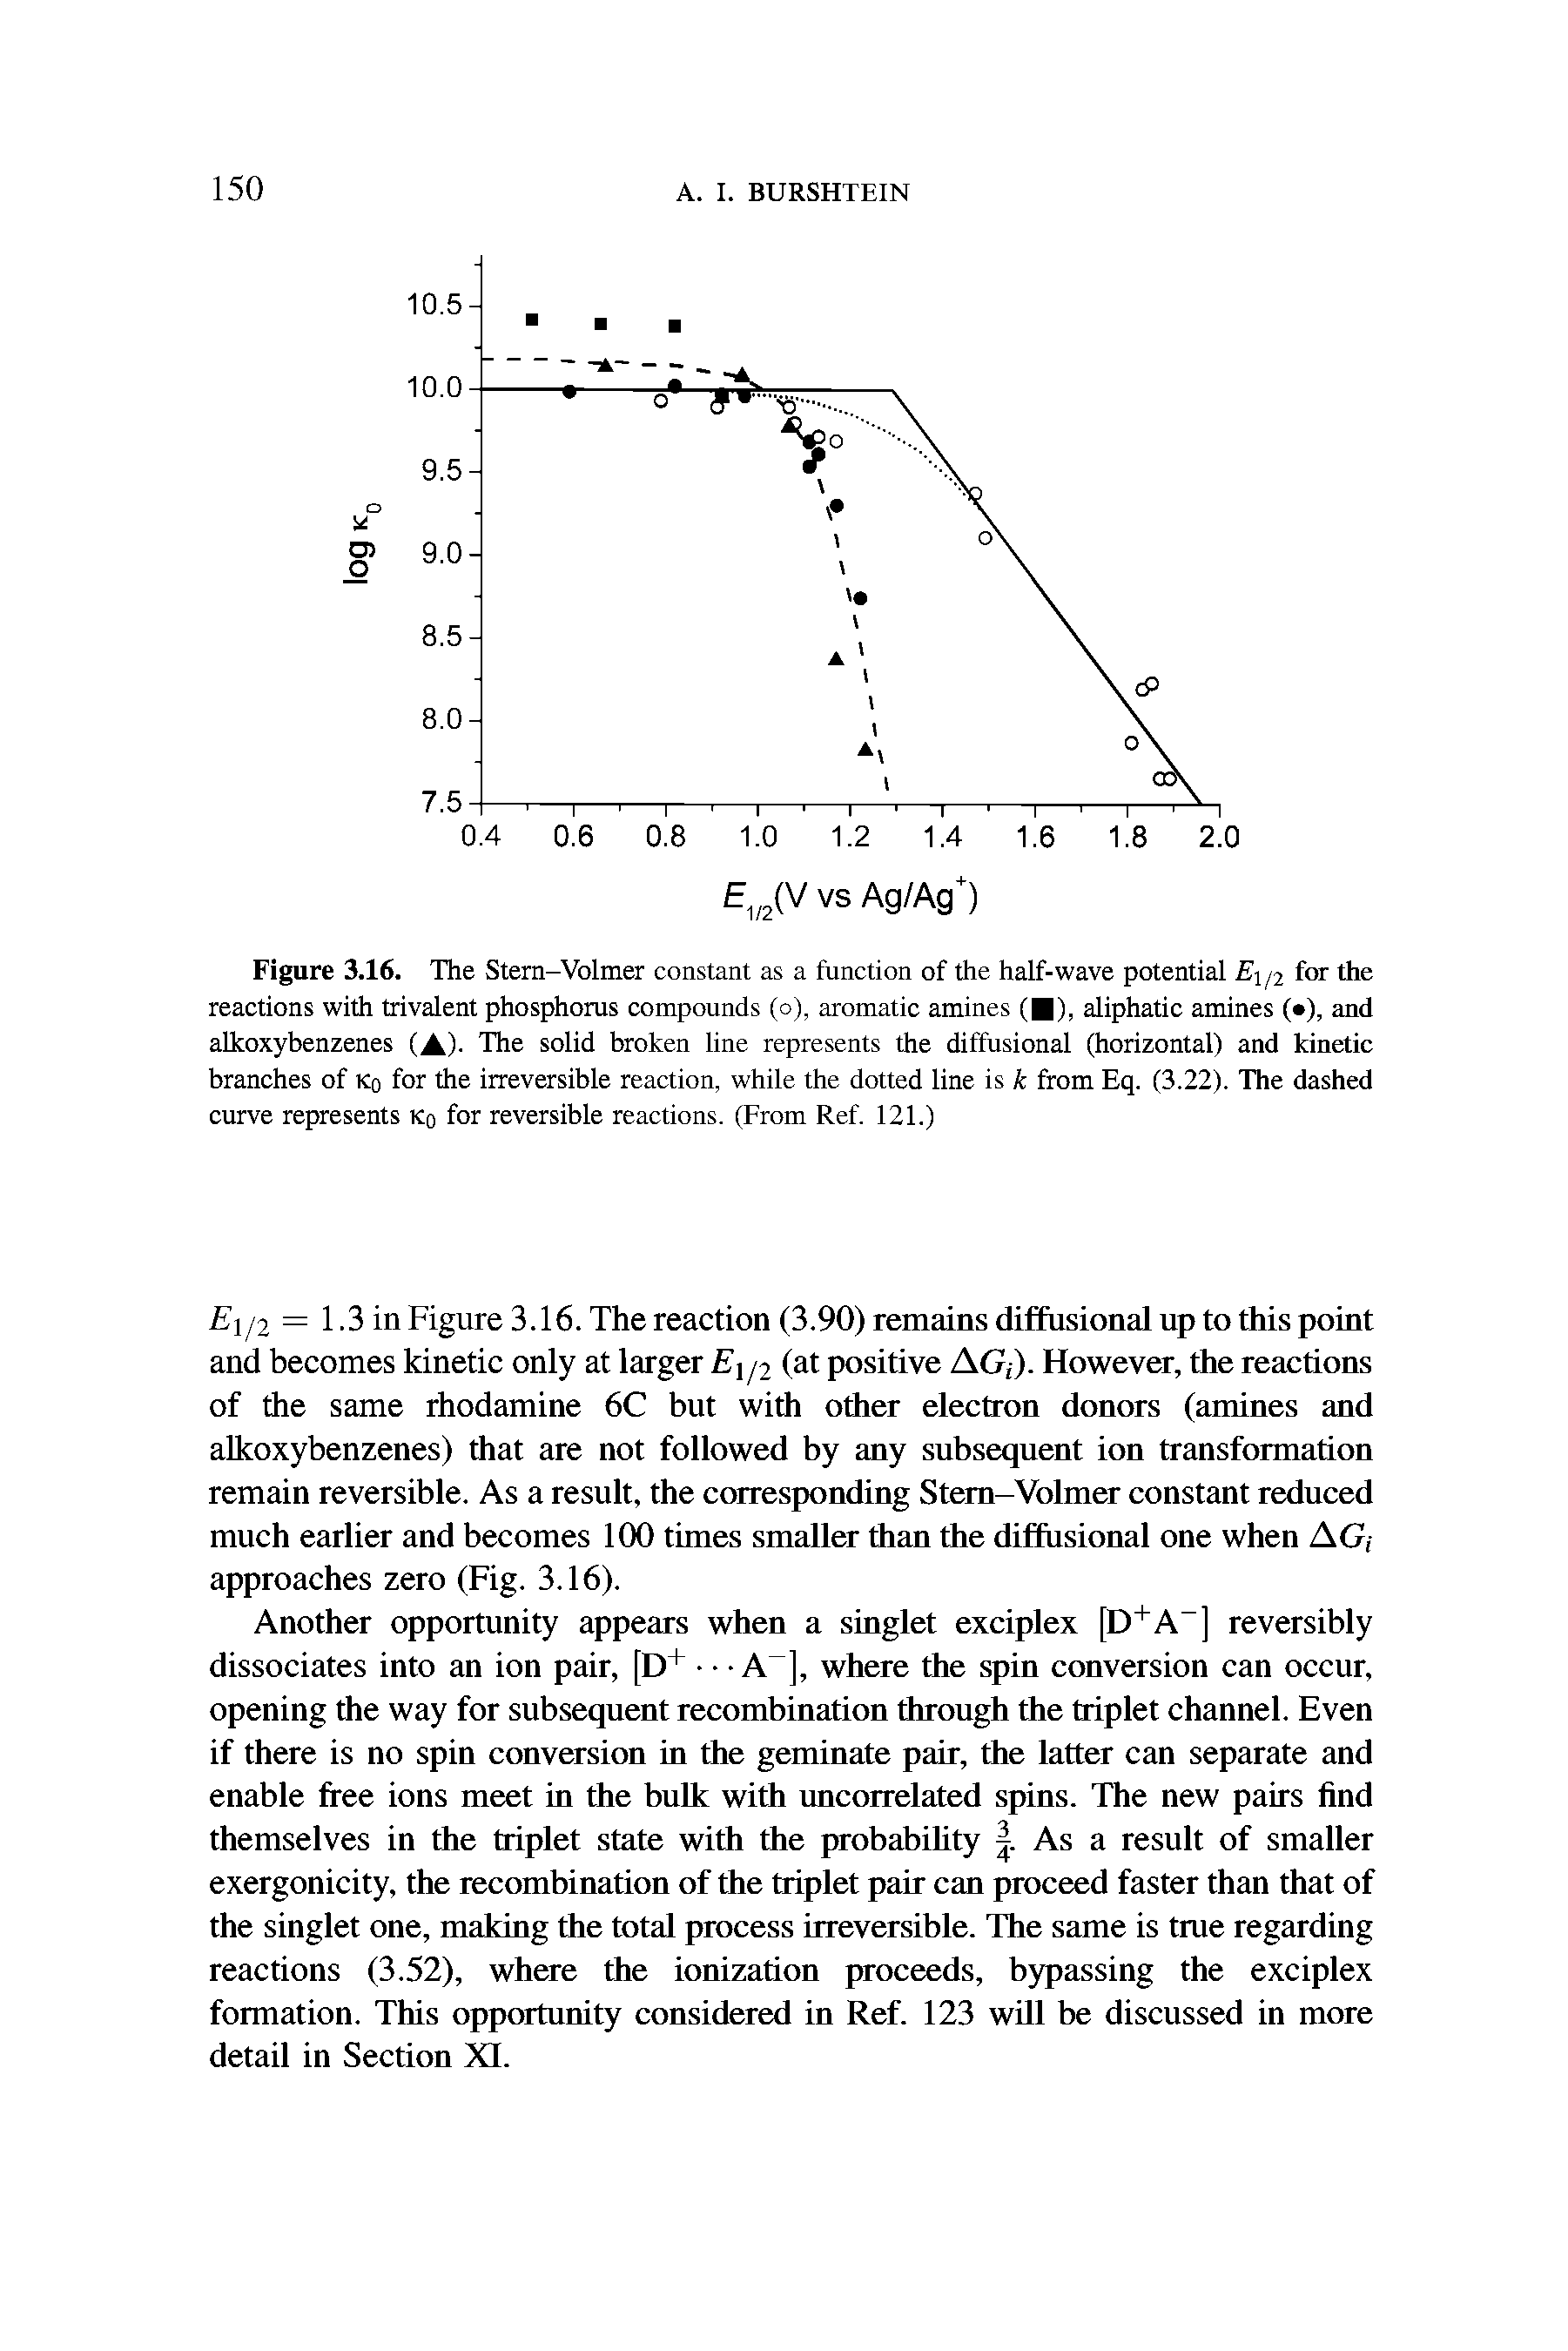 Figure 3.16. The Stern-Volmer constant as a function of the half-wave potential E /2 for the reactions with trivalent phosphorus compounds (o), aromatic amines ( ), aliphatic amines ( ), and alkoxybenzenes (A)- The solid broken line represents the diffusional (horizontal) and kinetic branches of Ko for the irreversible reaction, while the dotted line is k from Eq. (3.22). The dashed curve represents Ko for reversible reactions. (From Ref. 121.)...